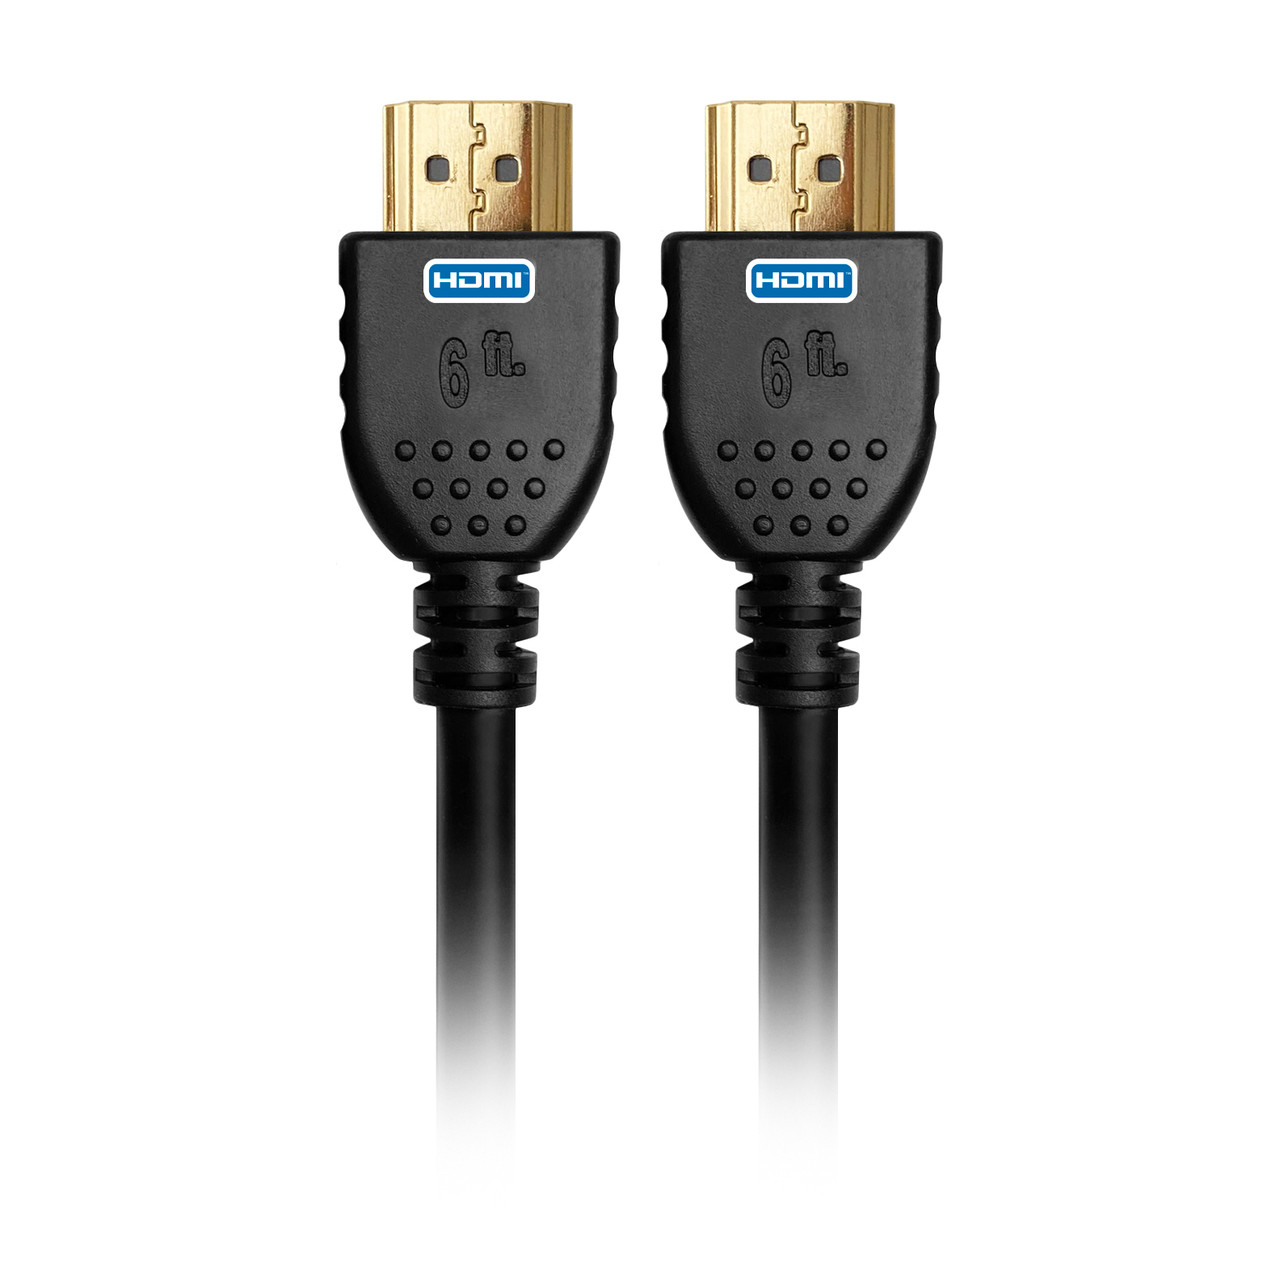 3ft Mini HDMI to HDMI Cable Adapter 4K - HDMI® Cables & HDMI Adapters